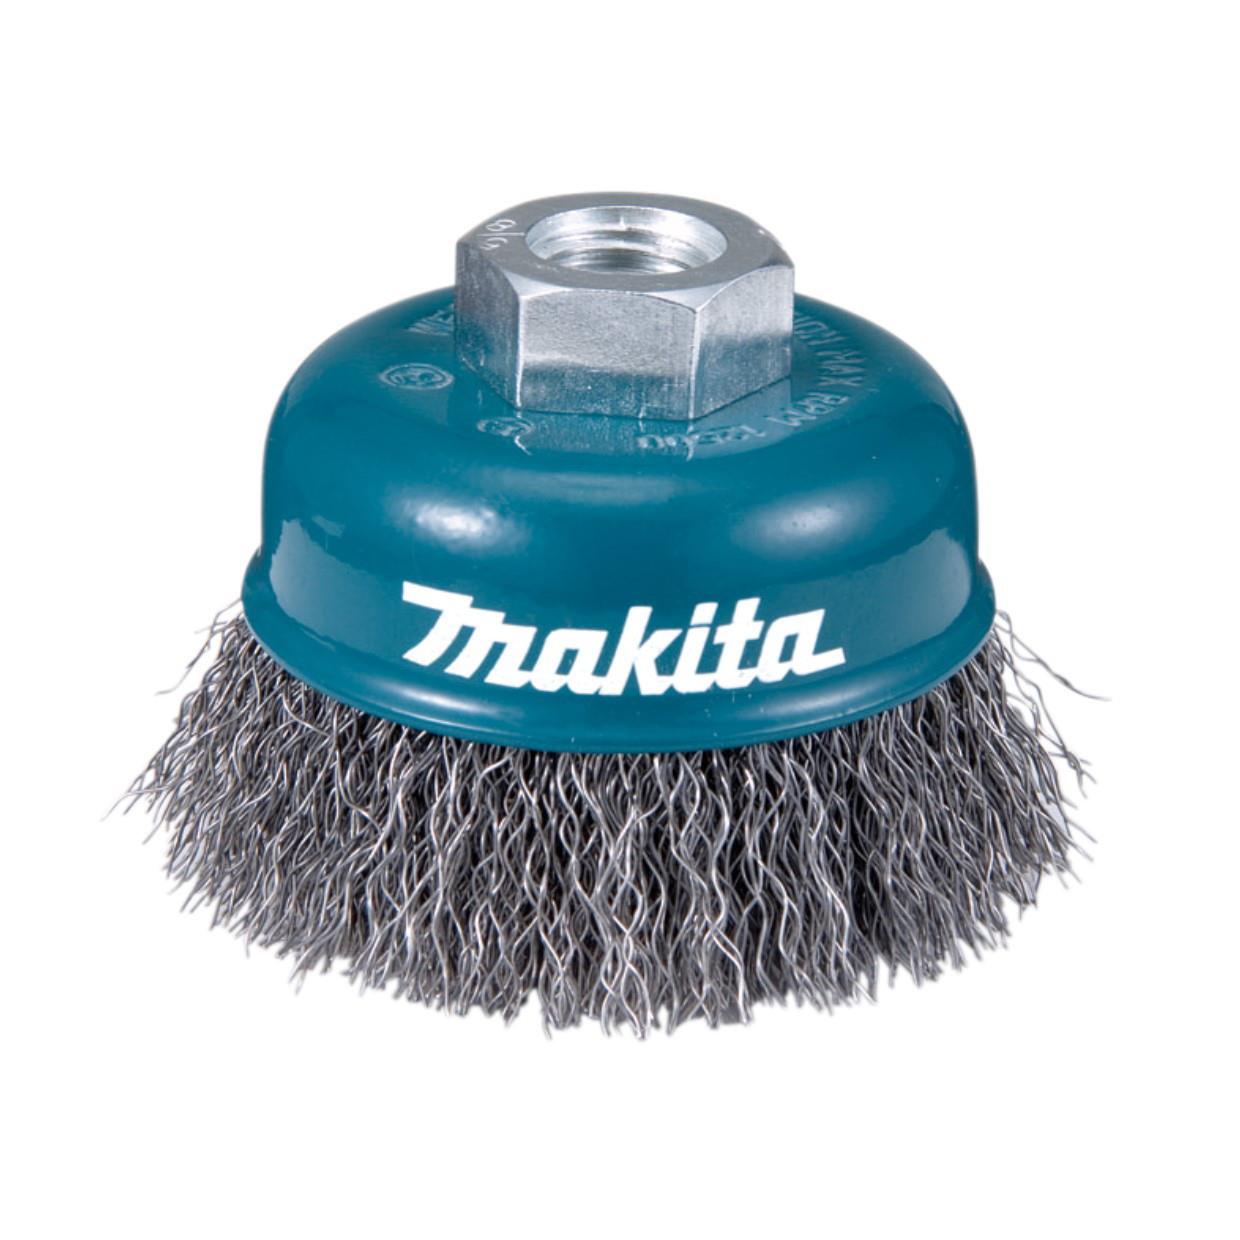 Makita D-24066 Crimp Wire Cup Brush; For Angle Grinder; 60mm Diameter; M10 x 1.5 Spindle Thread